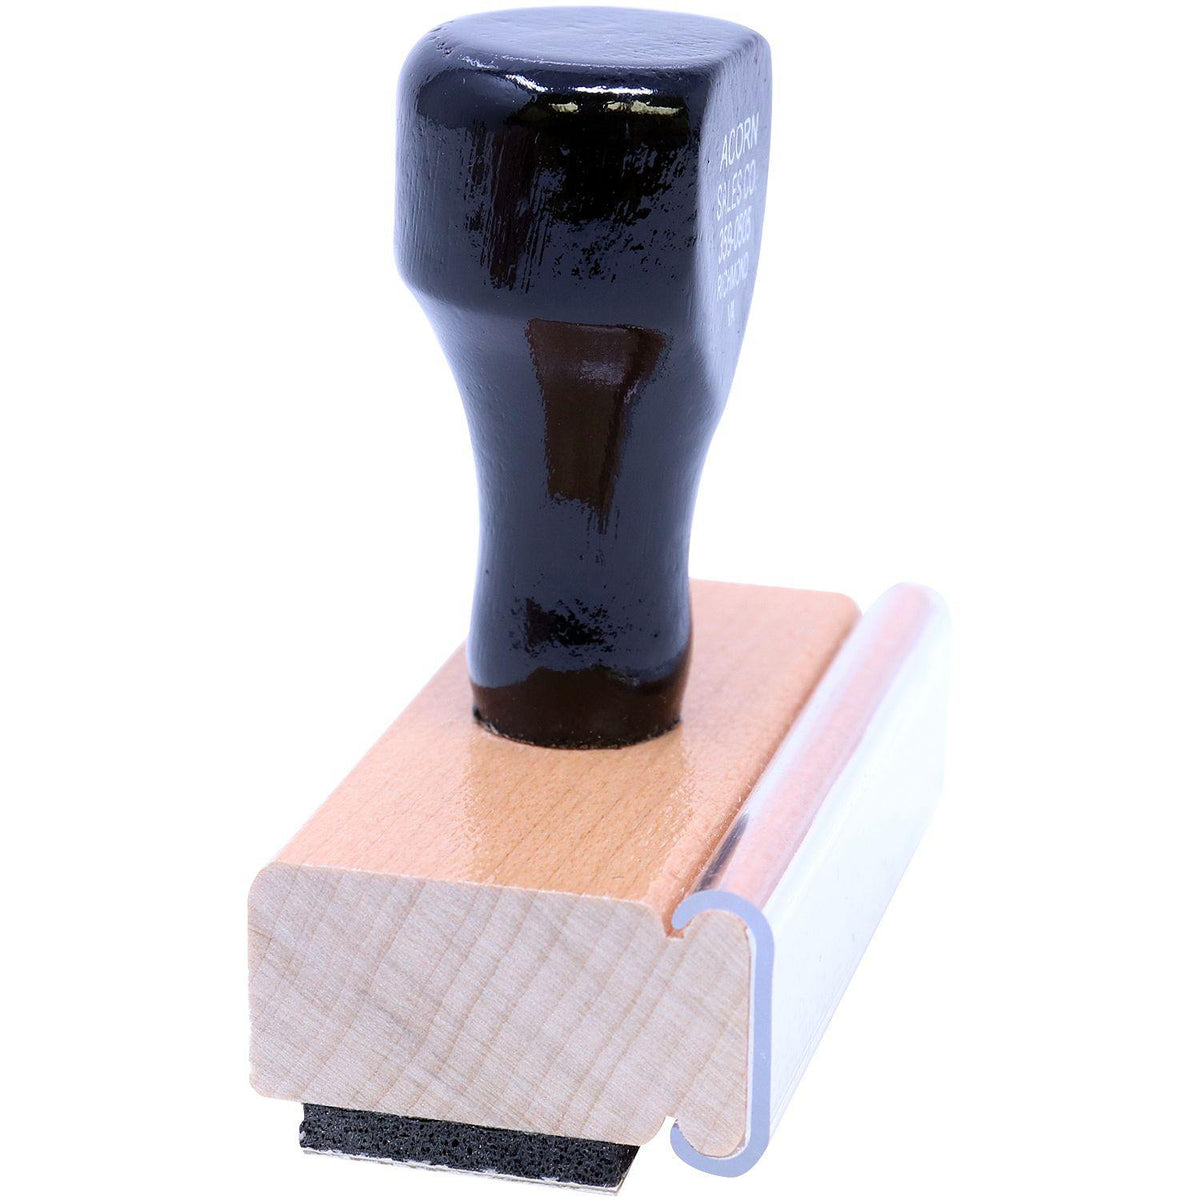 Side View of Fax It 2 Rubber Stamp at an Angle